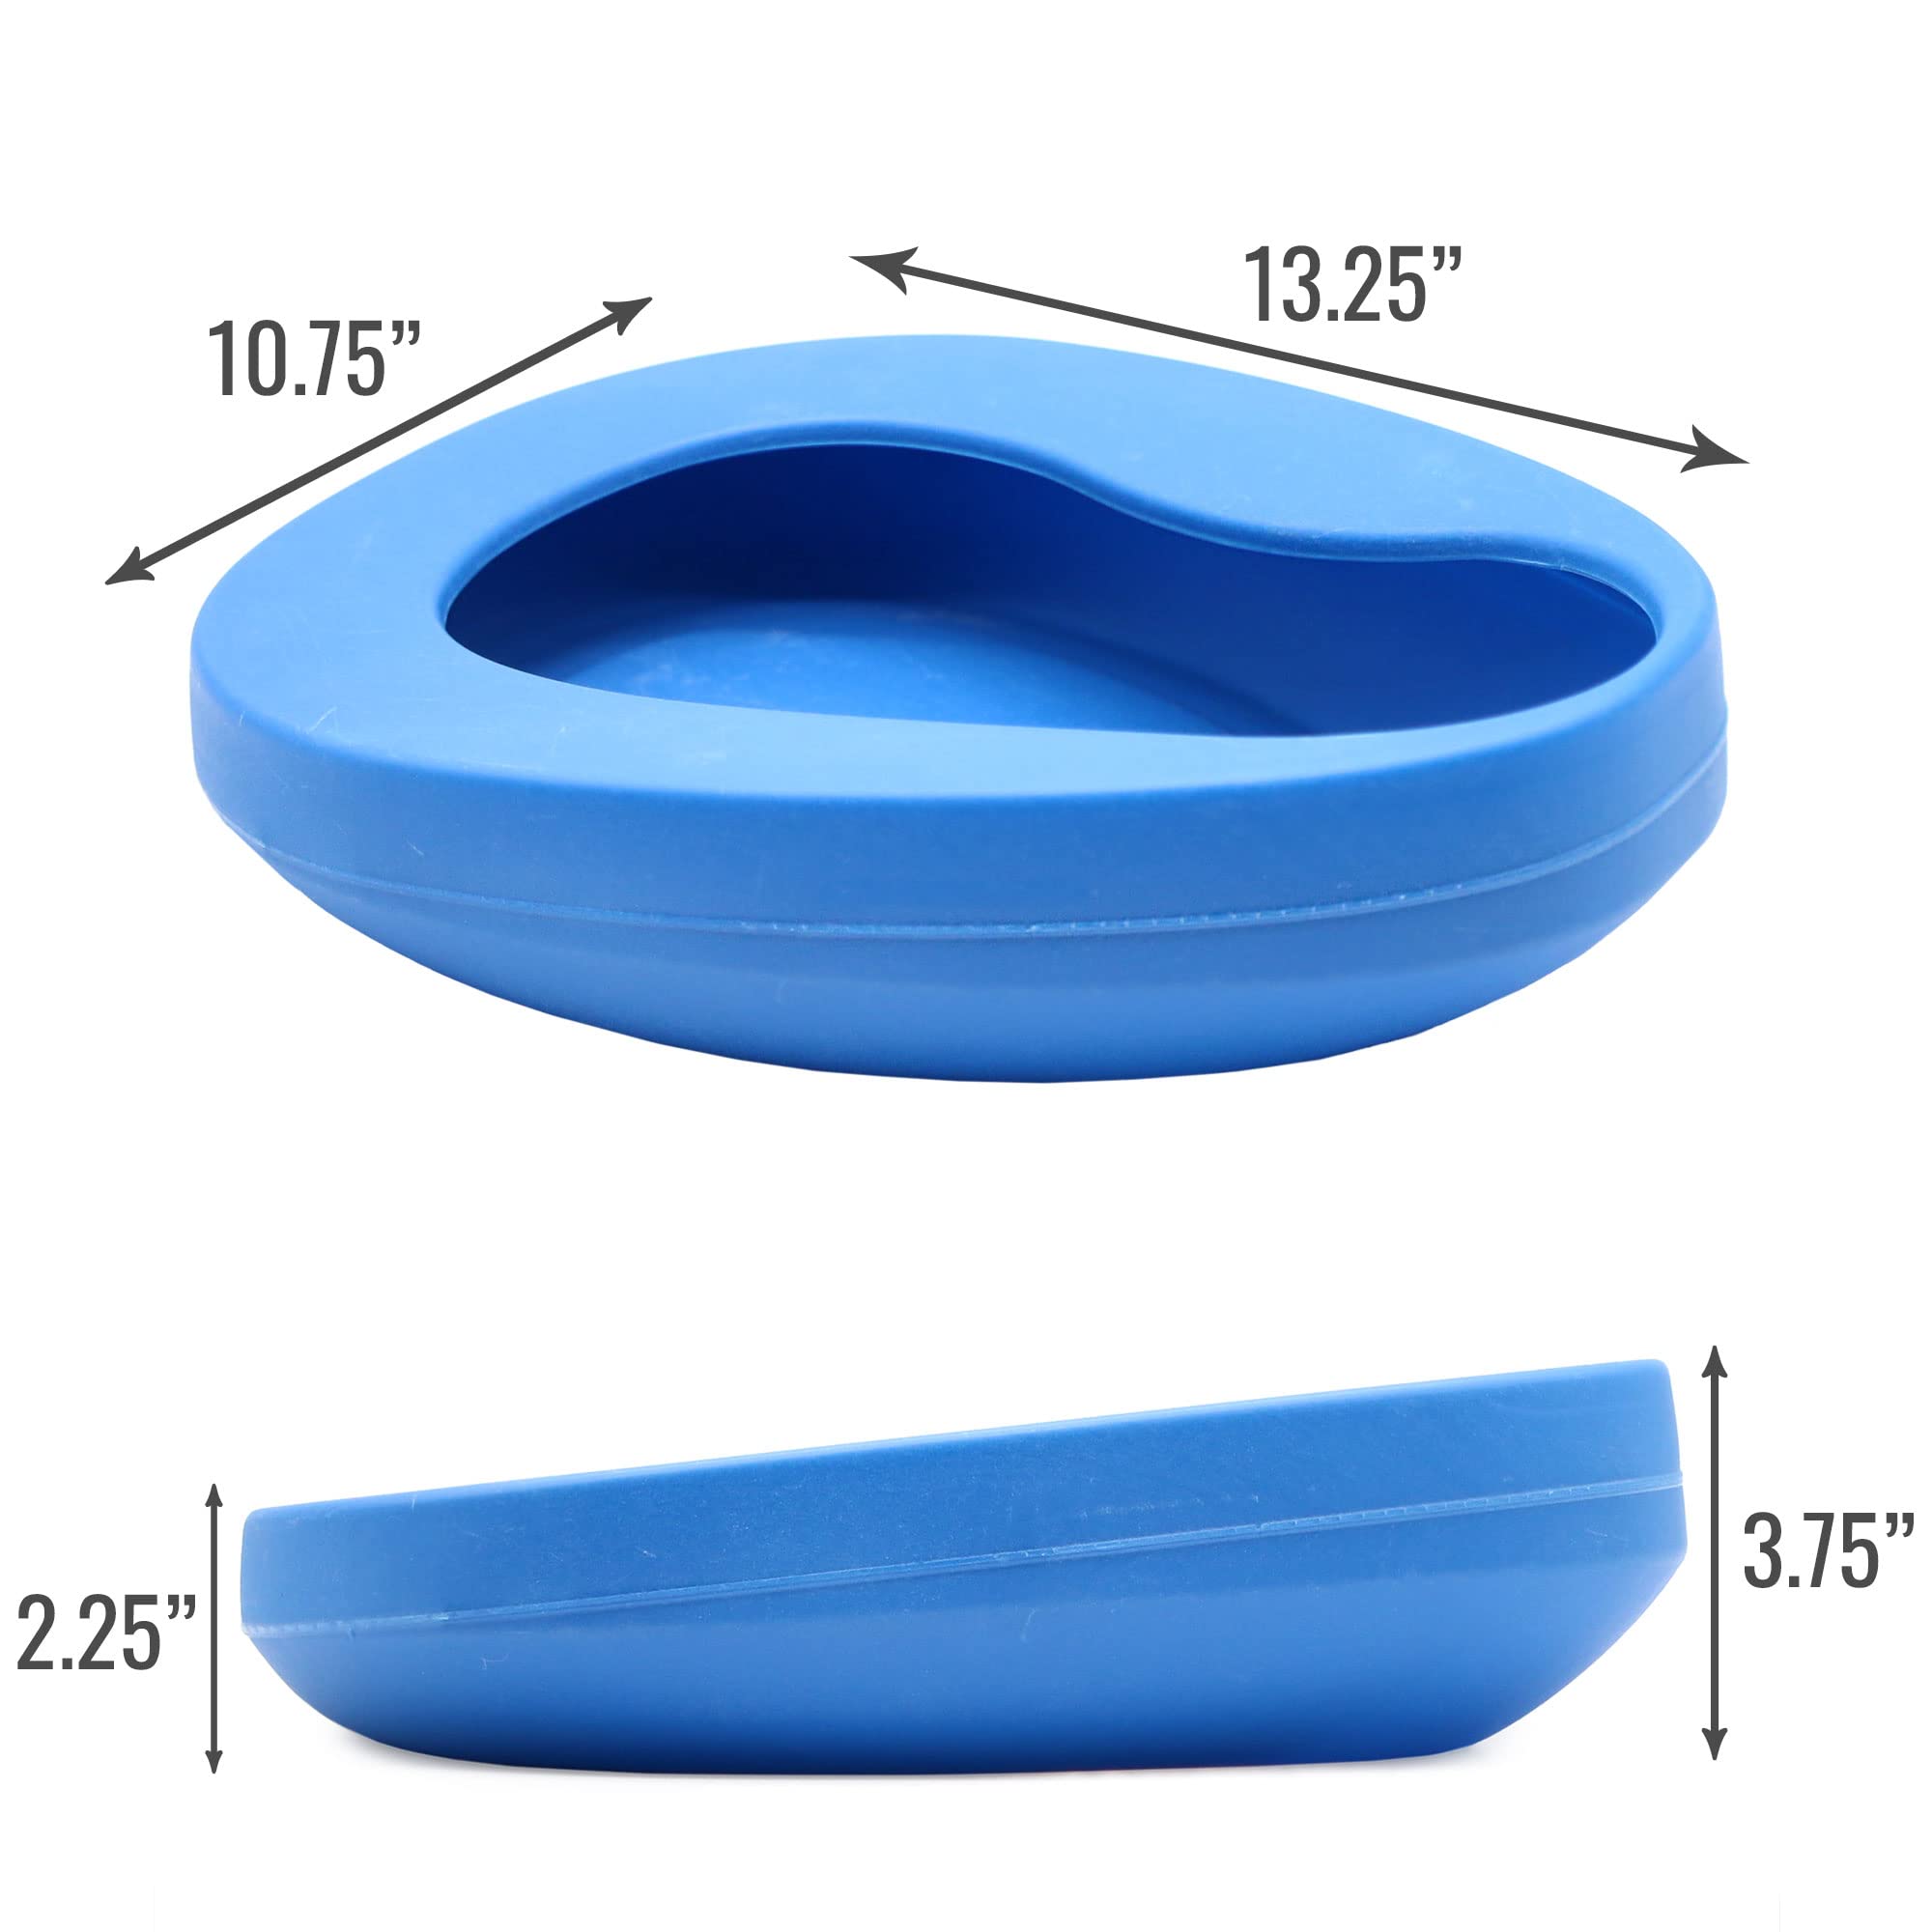 DMI Bedpan for Bariatric Adults with No Spill or Splash Design, FSA/HSA Eligible, Blue